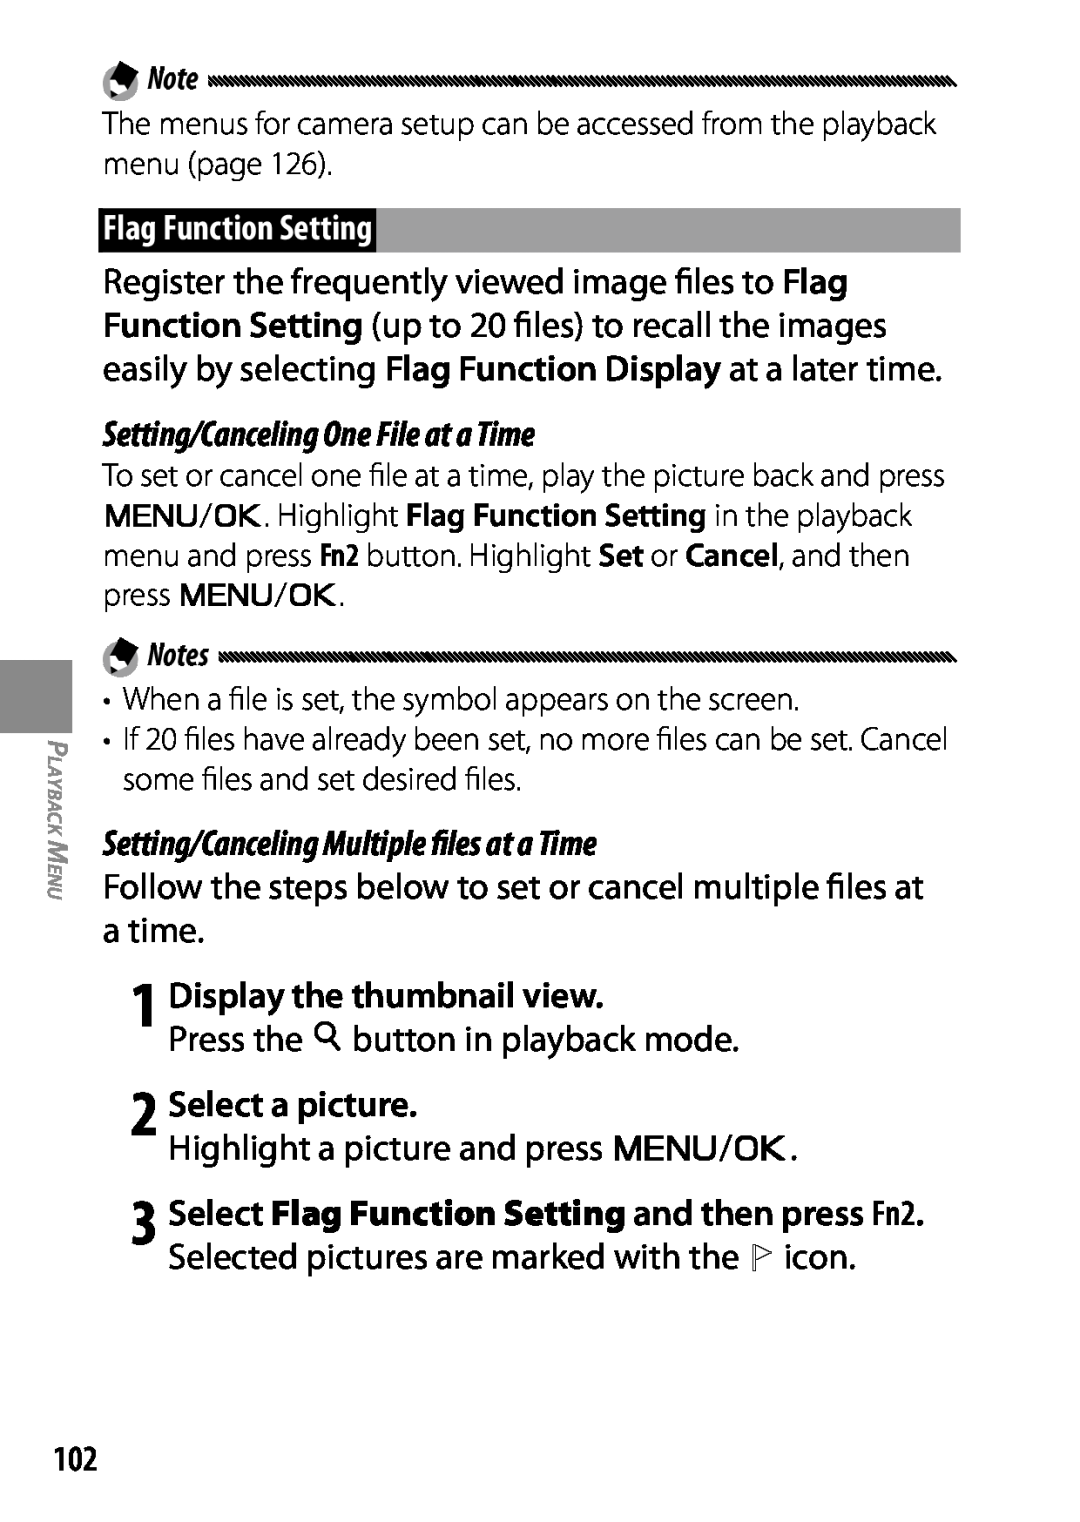 Ricoh GXR Flag Function Setting, 1 Display the thumbnail view, 2 Select a picture, Setting/Canceling One File at a Time 